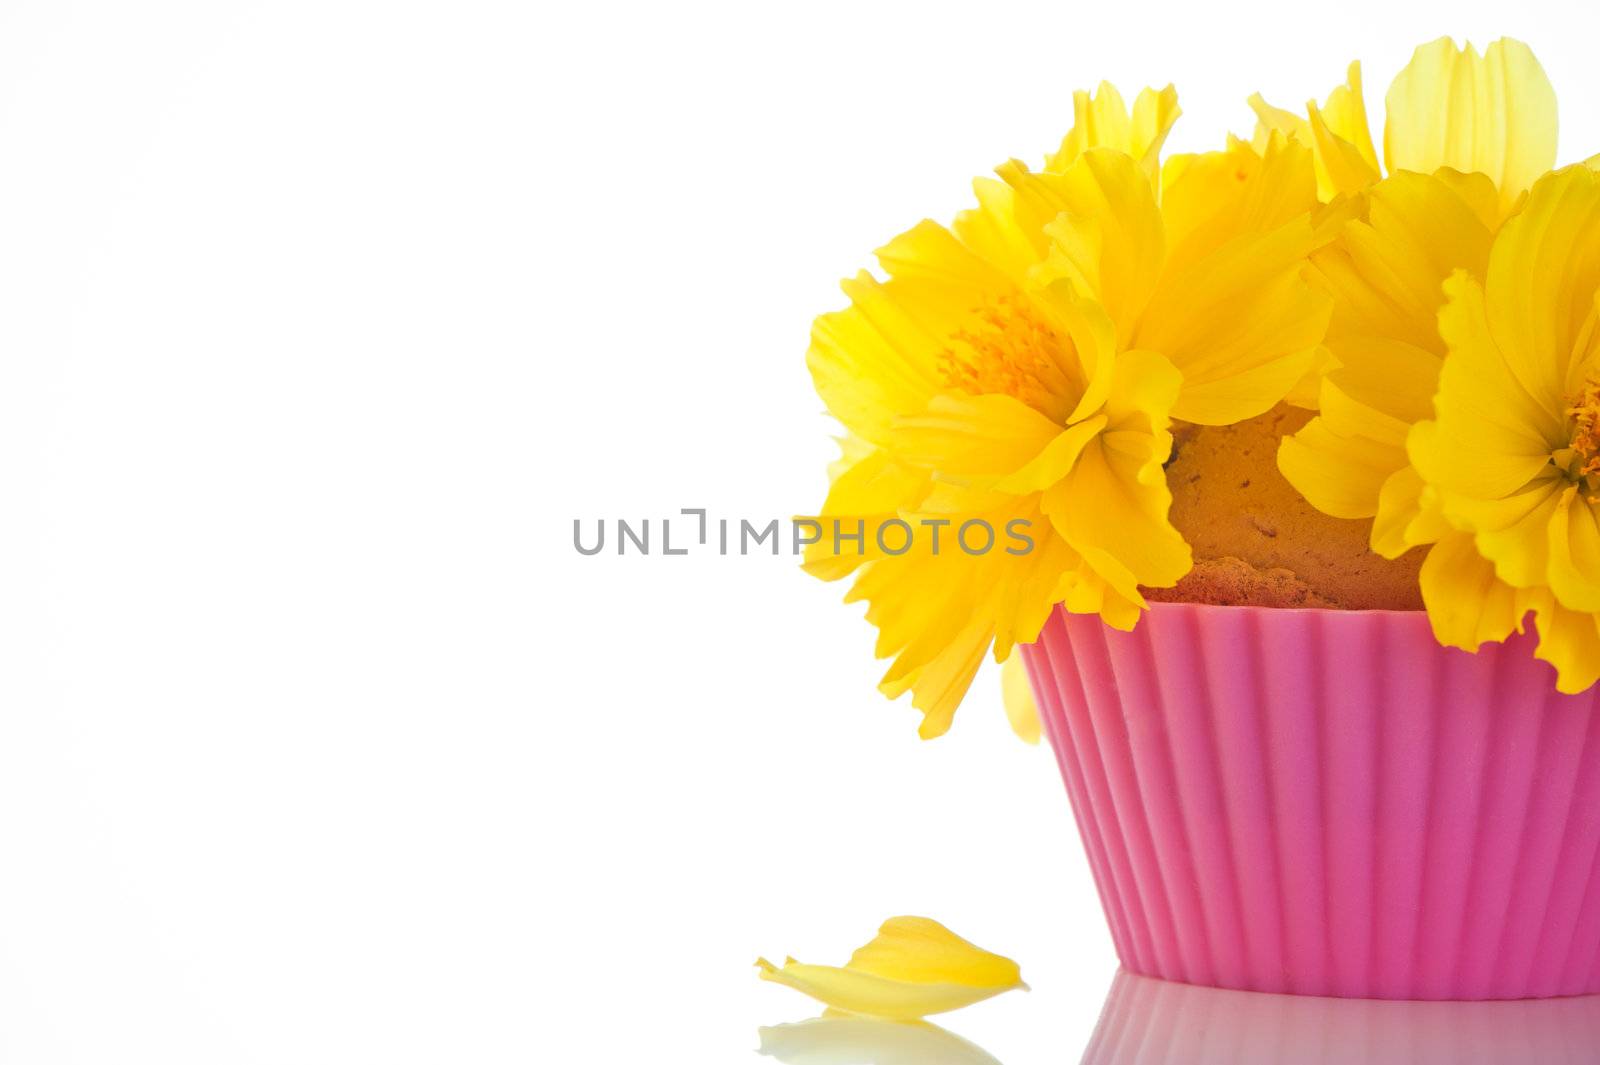 Small bouquet of flowers on an edible content by p.studio66